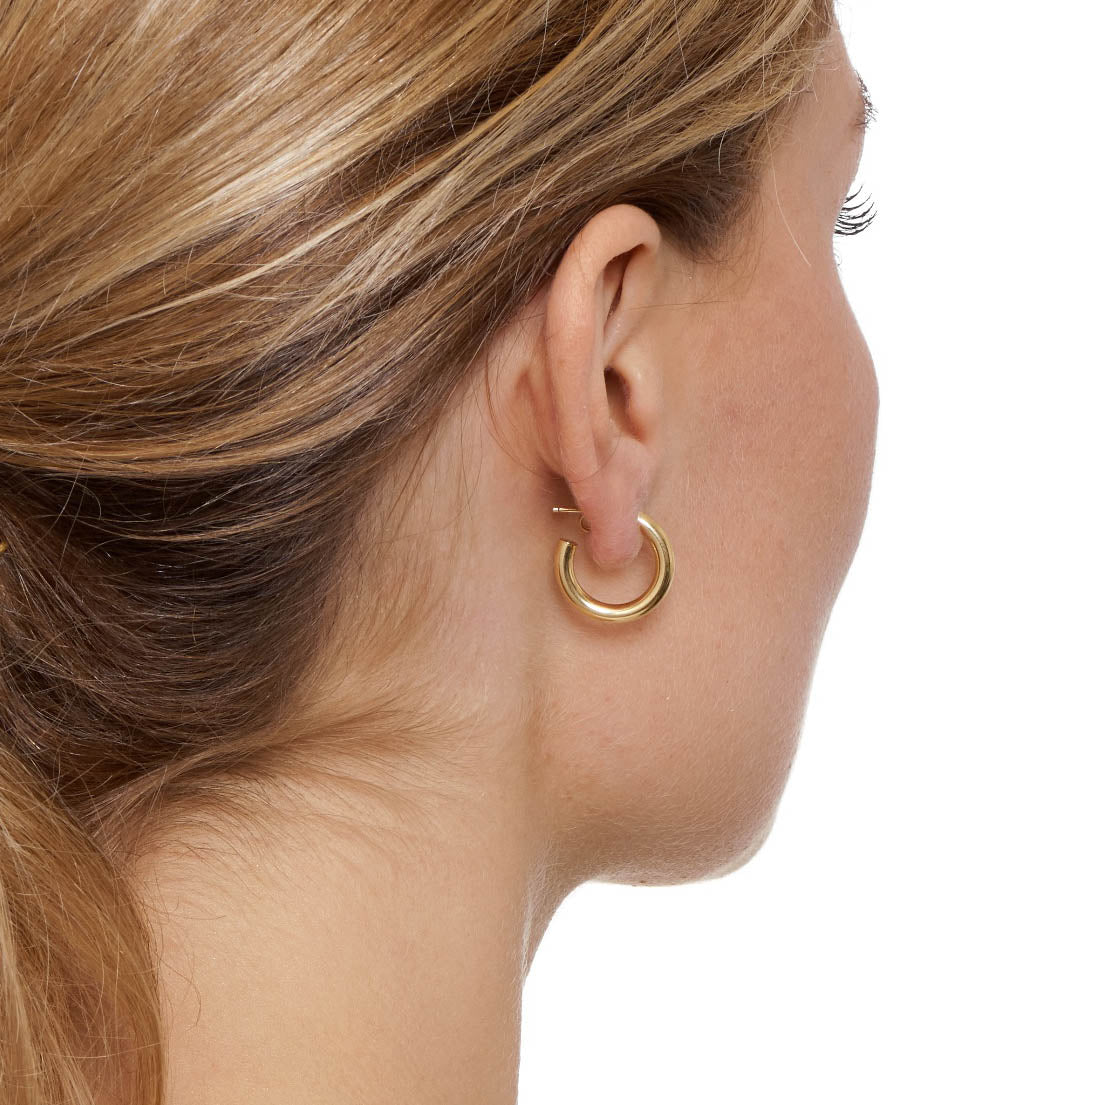 La NAPOLI Collection Silver - The Hoop Station 925 Sterling Silver Hoop Earrings Gold Huggies